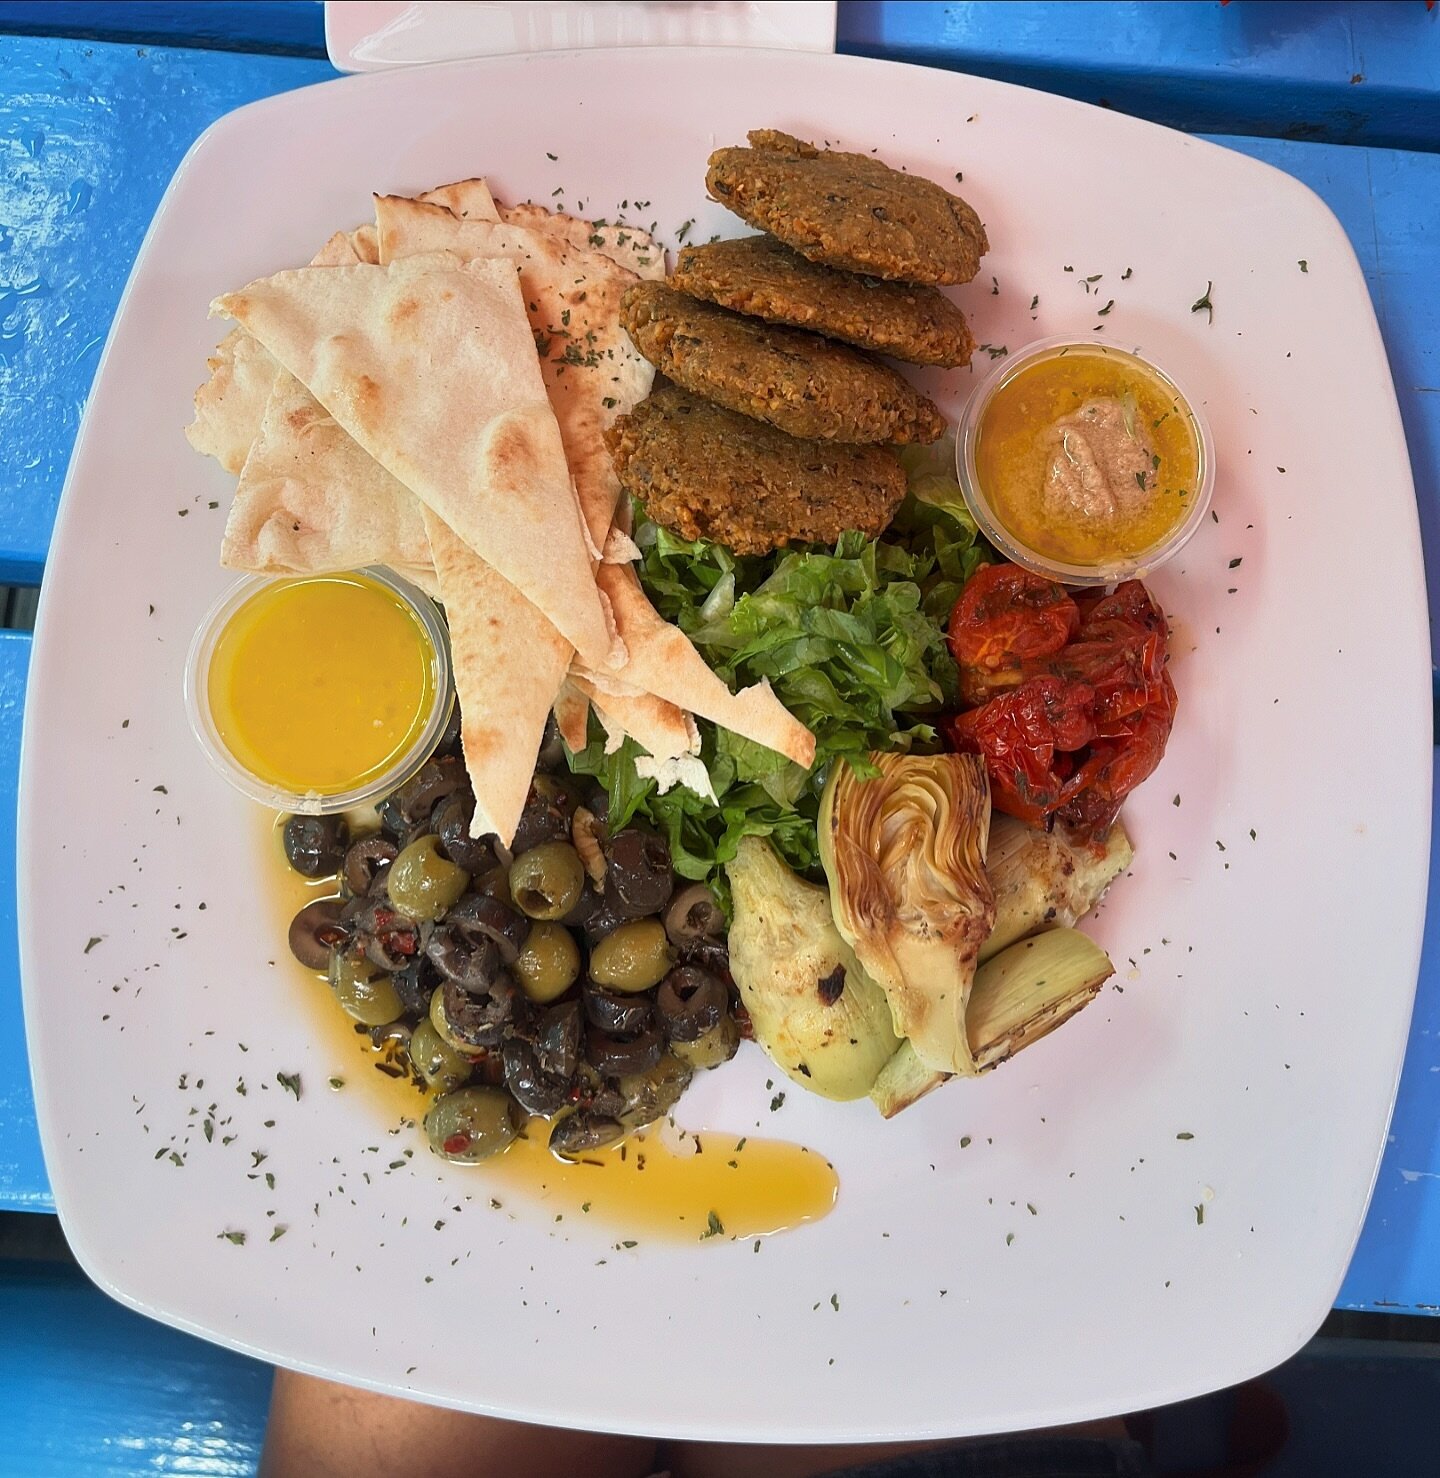 Our new Mezze Platter 🫒

A delectable vegetarian option including: Falafels, grilled artichokes, pita bread, hummus, olives &amp; salad and a tasty dressing on the side.